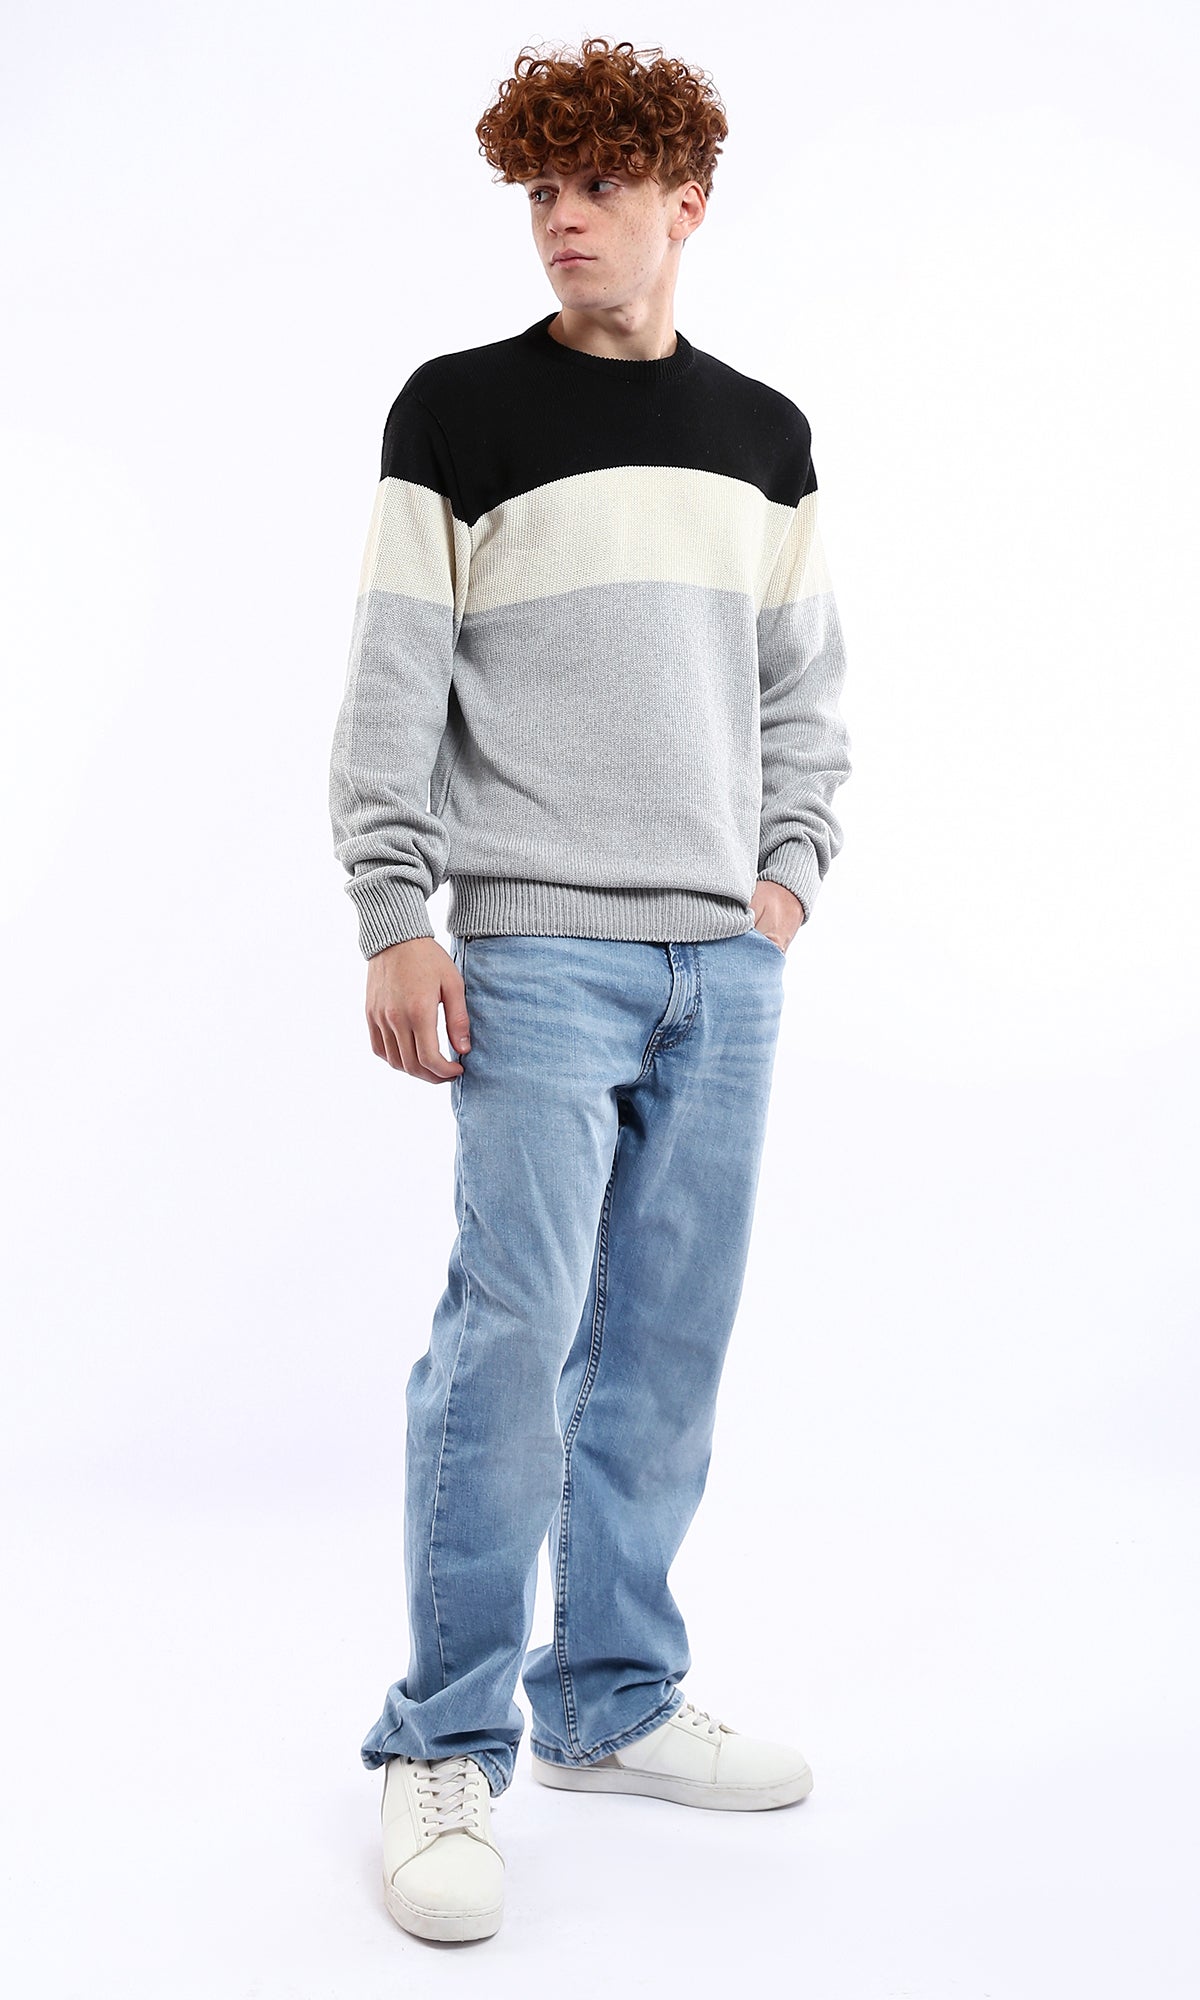 O174215 Grey & Black Knitted Pullover With Ribbed Neck